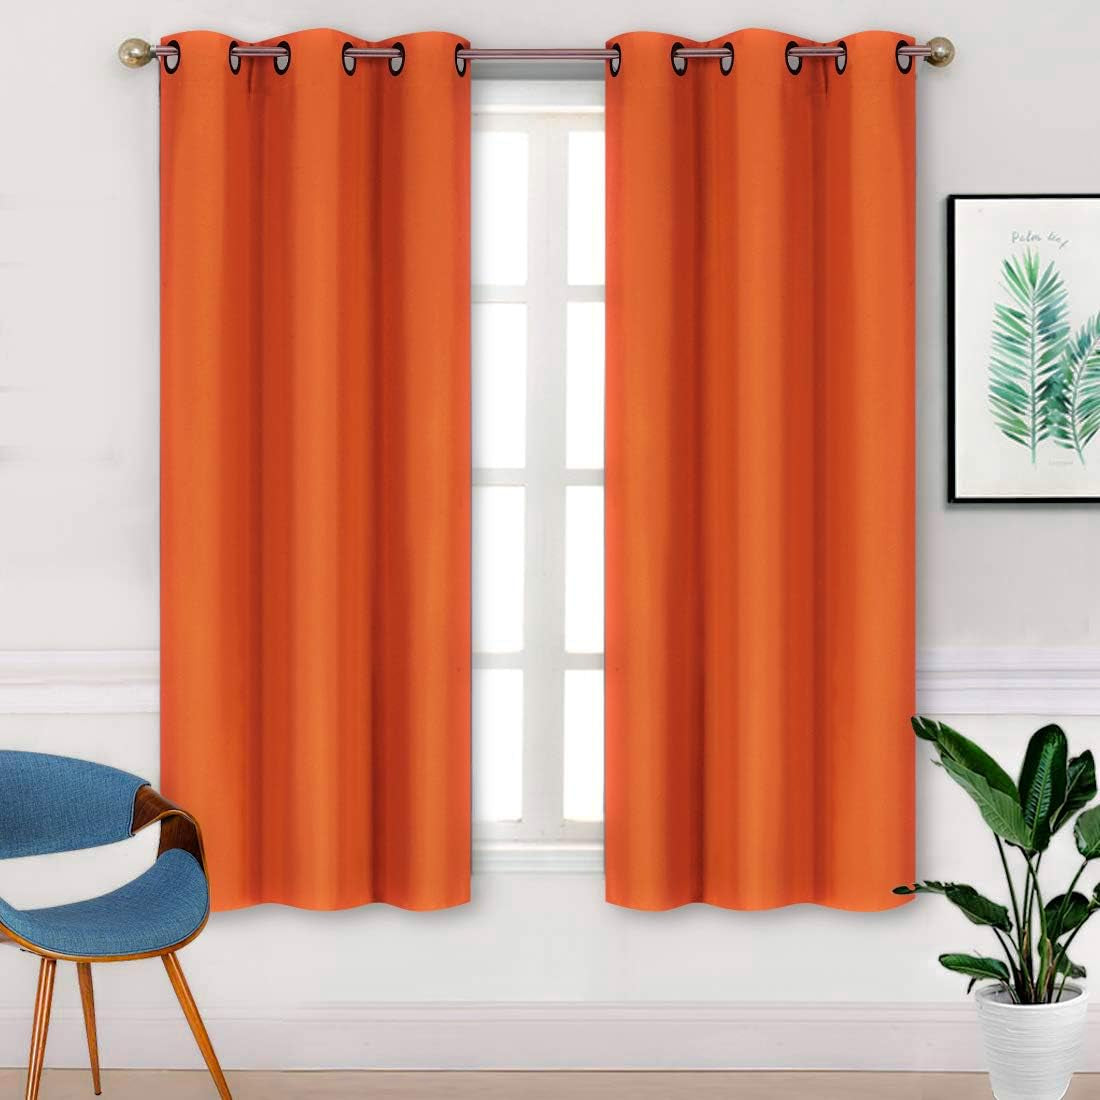 Home Collection 2 Panels 100% Blackout Curtain Set Solid Color with Rod Pocket Grommet Drapes for Kitchen, Dinning Room, Bathroom, Bedroom,Living Room Window New (74” Wide X 62” Long, Ivory)  Kids Zone home Linen Orange 74” Wide X 62” Long 